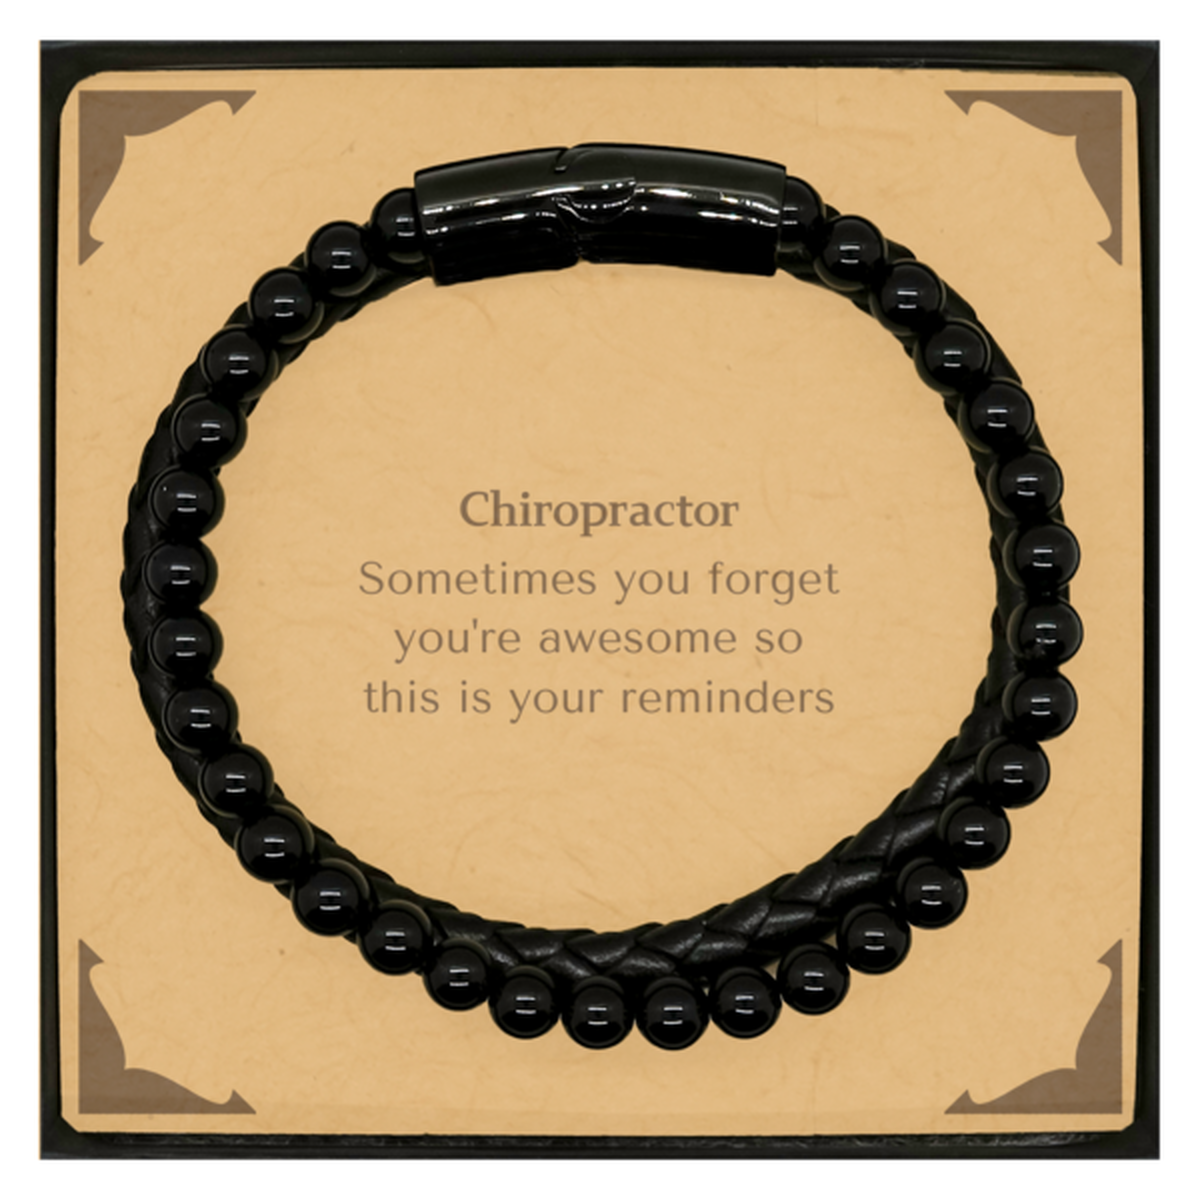 Sentimental Chiropractor Stone Leather Bracelets, Chiropractor Sometimes you forget you're awesome so this is your reminders, Graduation Christmas Birthday Gifts for Chiropractor, Men, Women, Coworkers